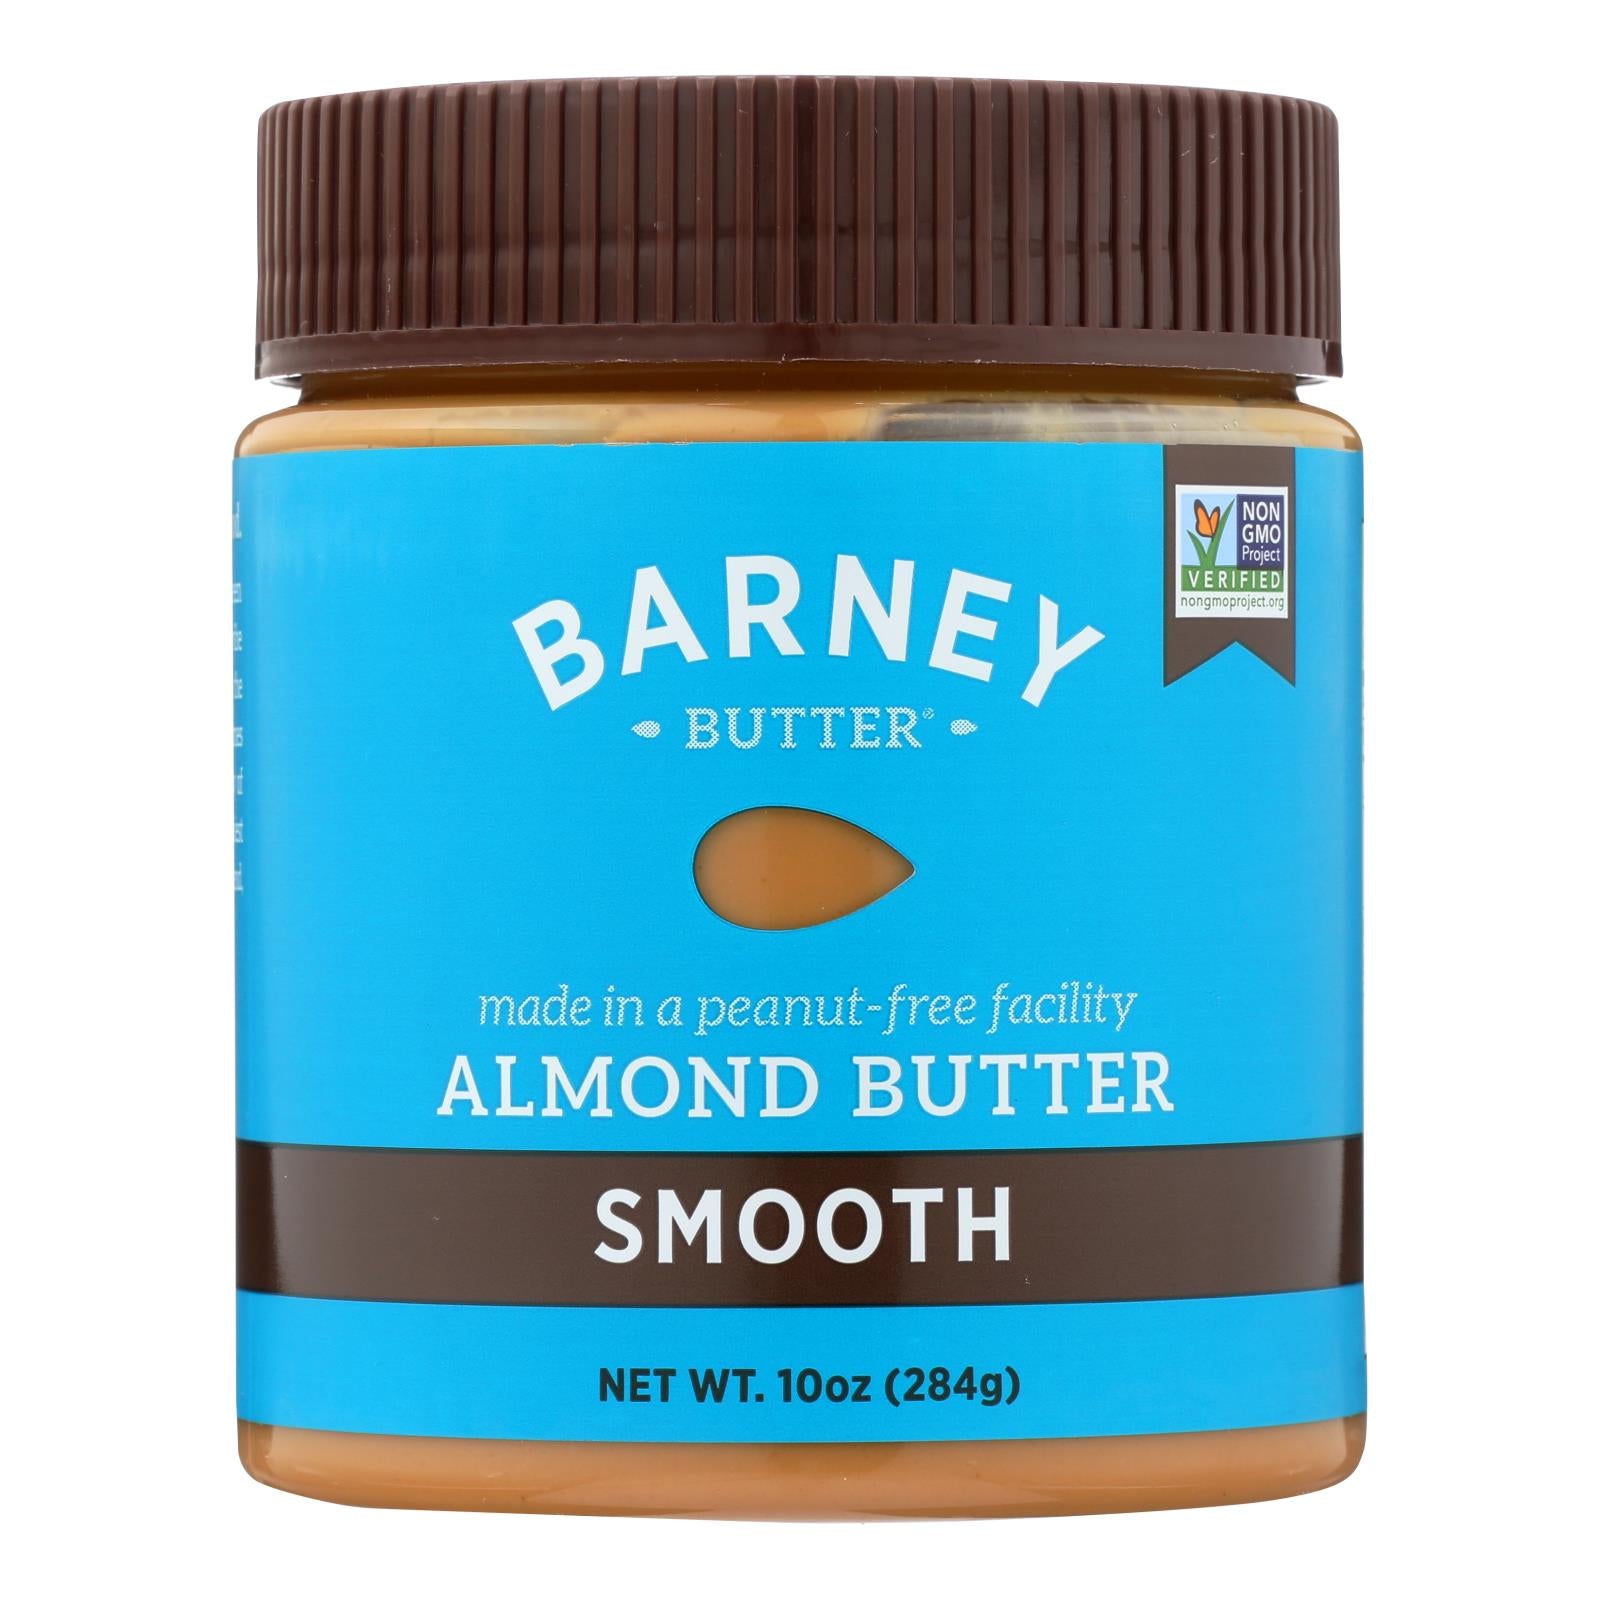 Barney Butter, Barney Butter - Almond Butter - Smooth - Case of 6 - 10 oz. (Pack of 6)